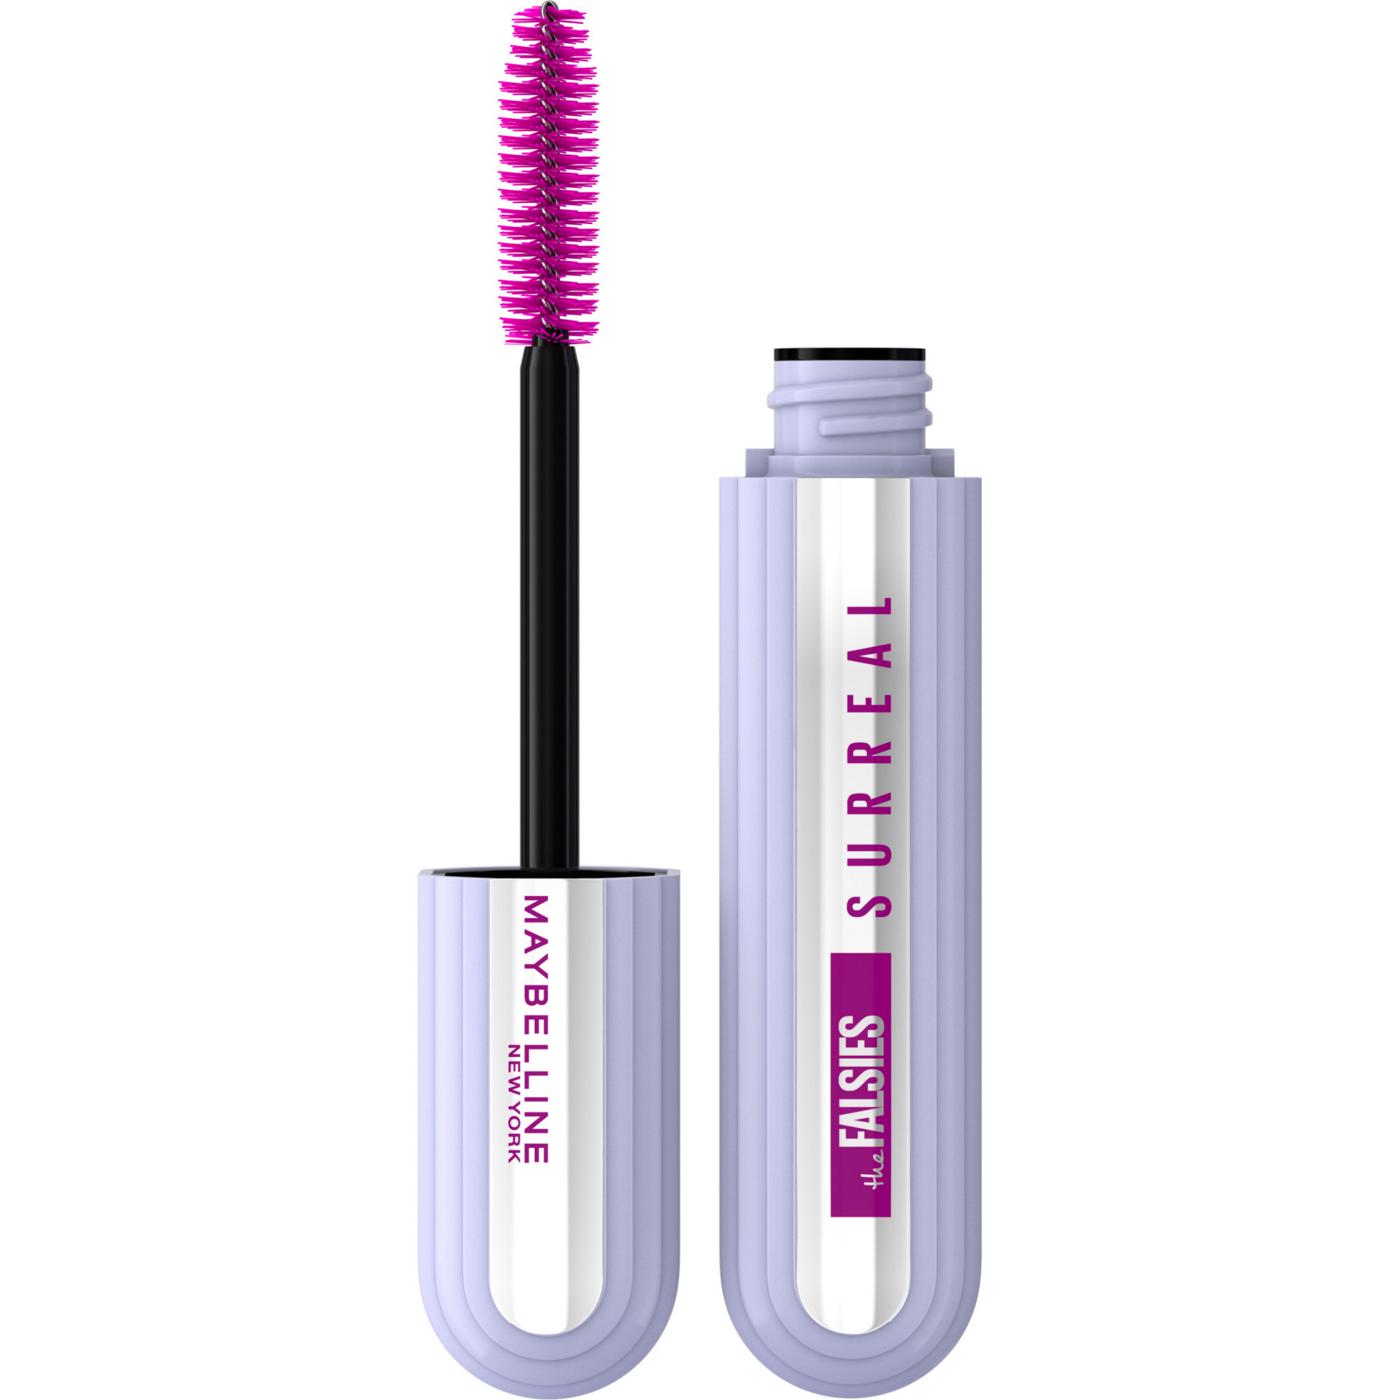 Maybelline The Falsies Surreal Extensions Mascara - Brownish Black; image 3 of 3